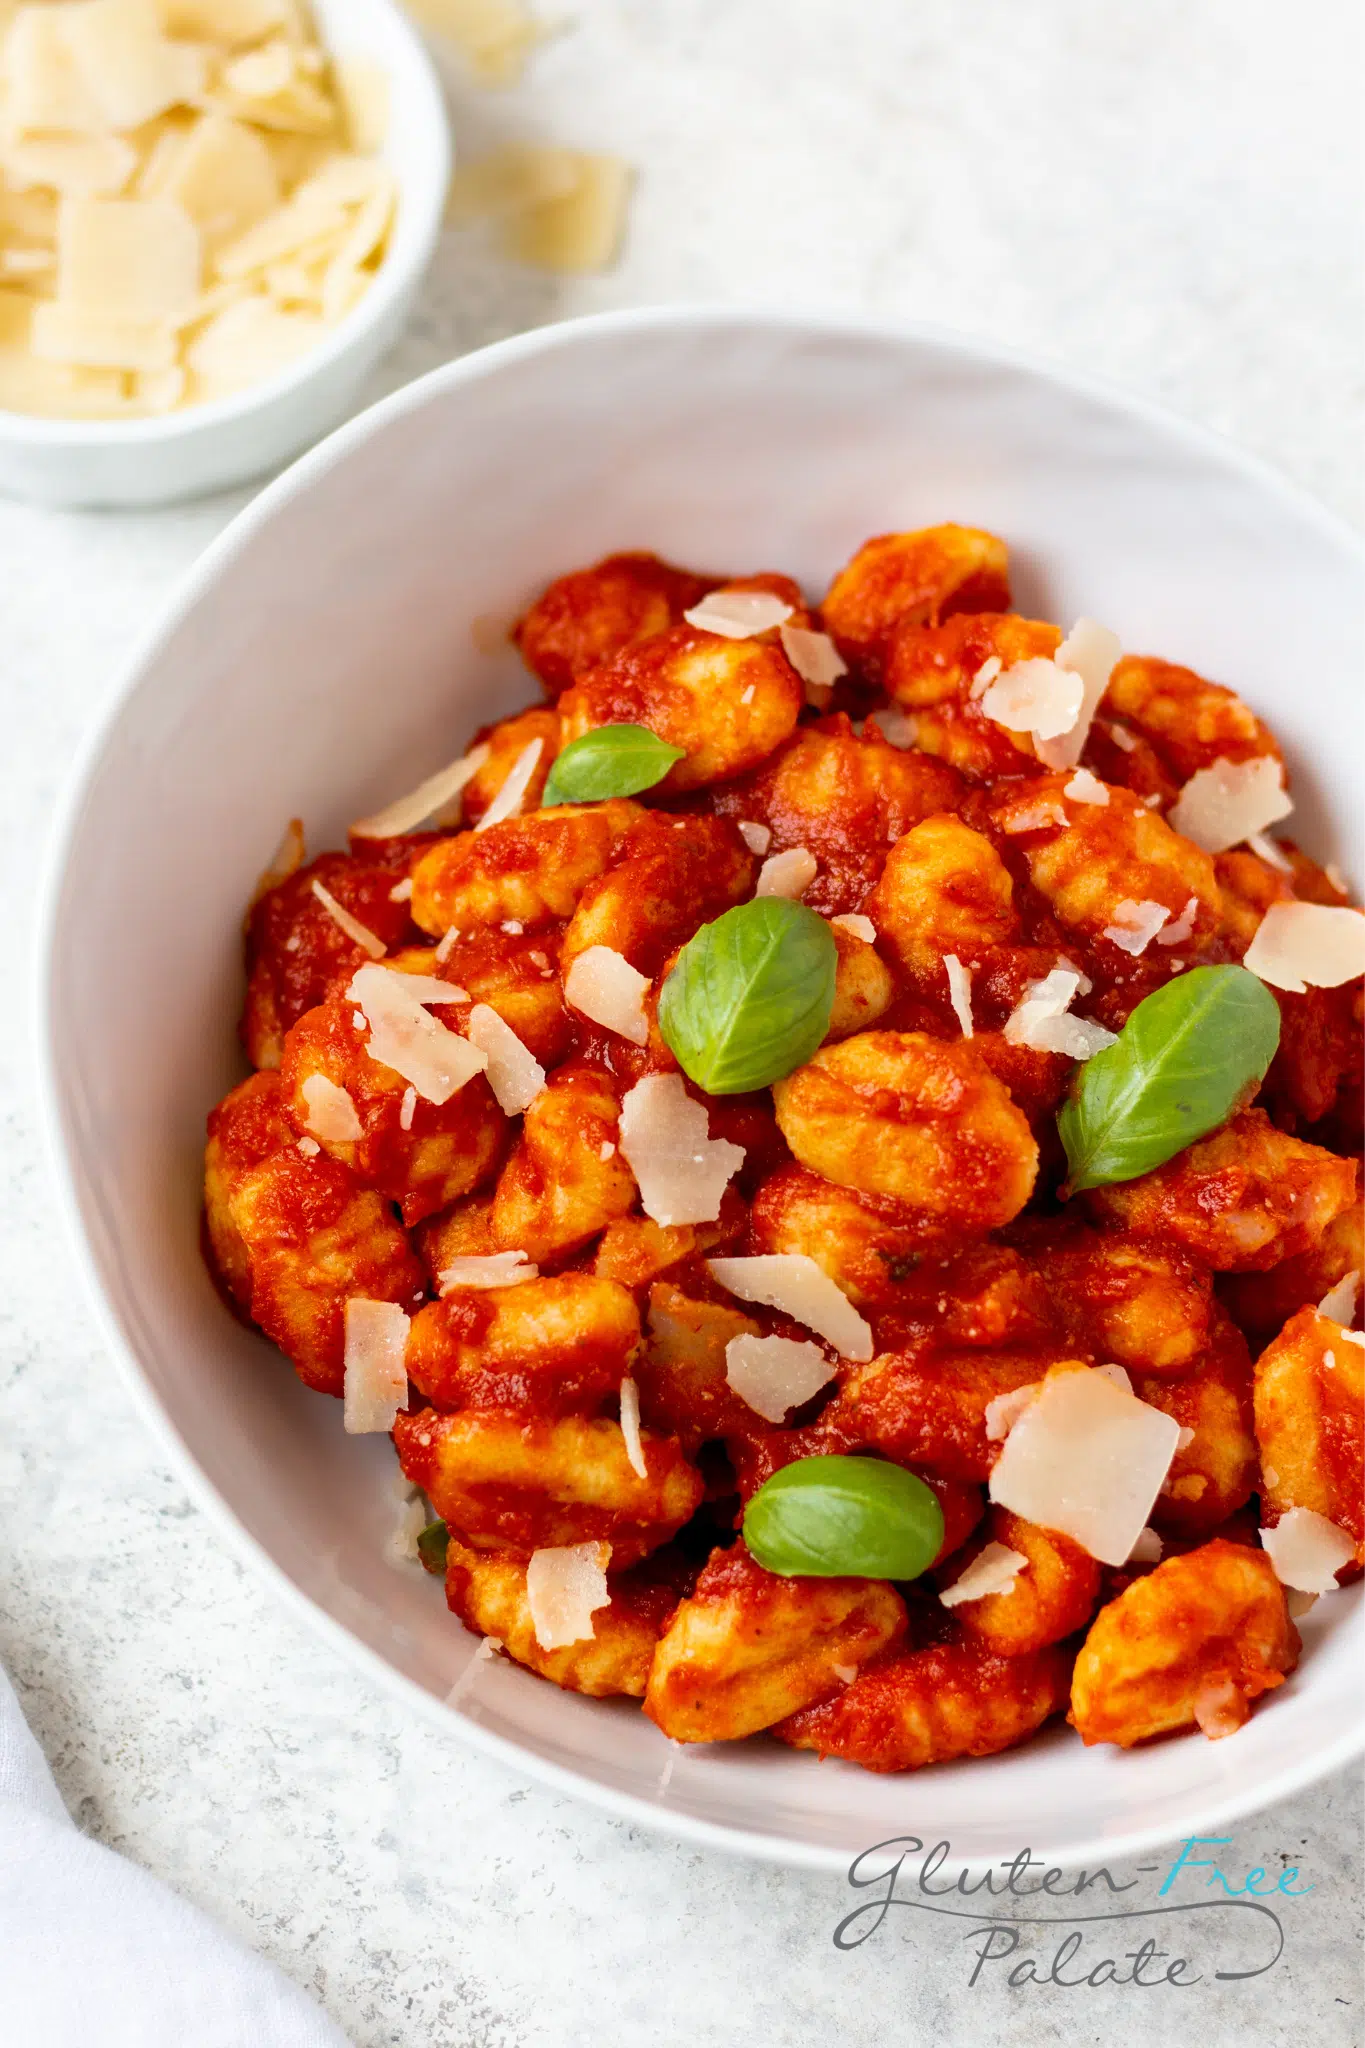 a bowl of gluten-free gnocchi in tomato sauce garnished with parmesan cheese and fresh basil leaves